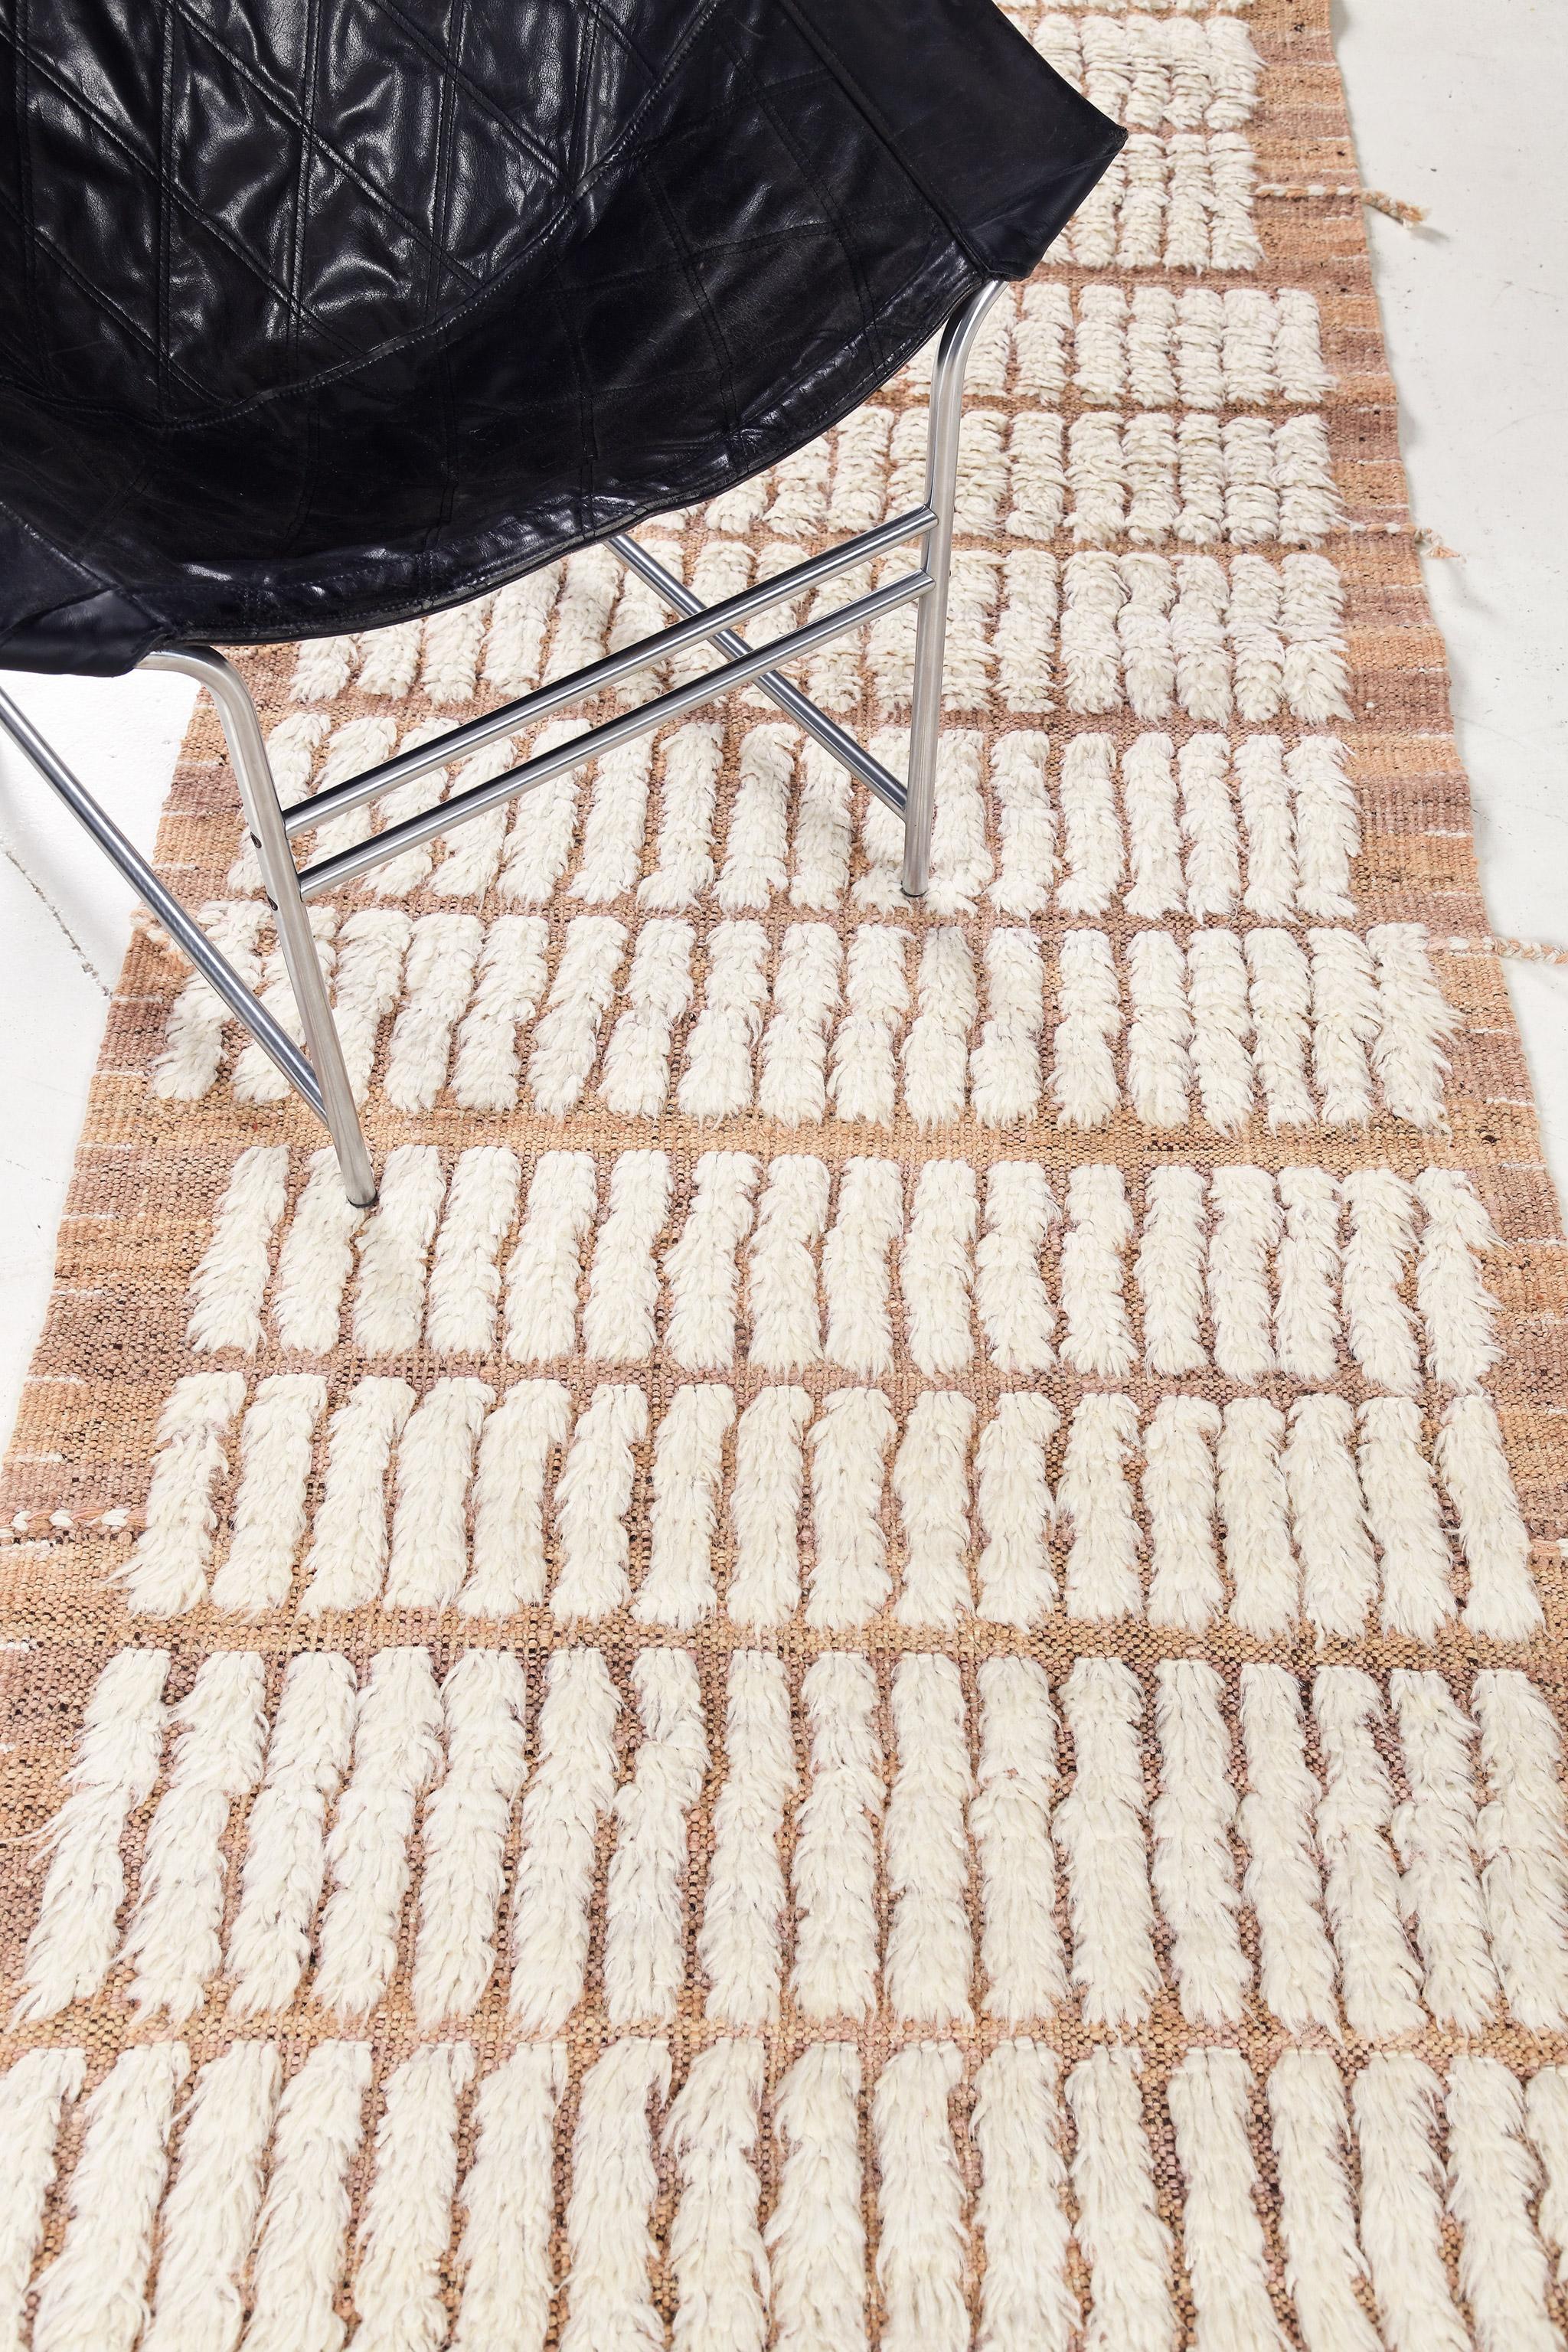 The signature Collection of California. Handwoven luxurious wool rug, made of timeless design elements and neutral earth tones with the perfect shade of white shag. Haute Bohemian collection: designed in Los Angeles named for the winds knitting